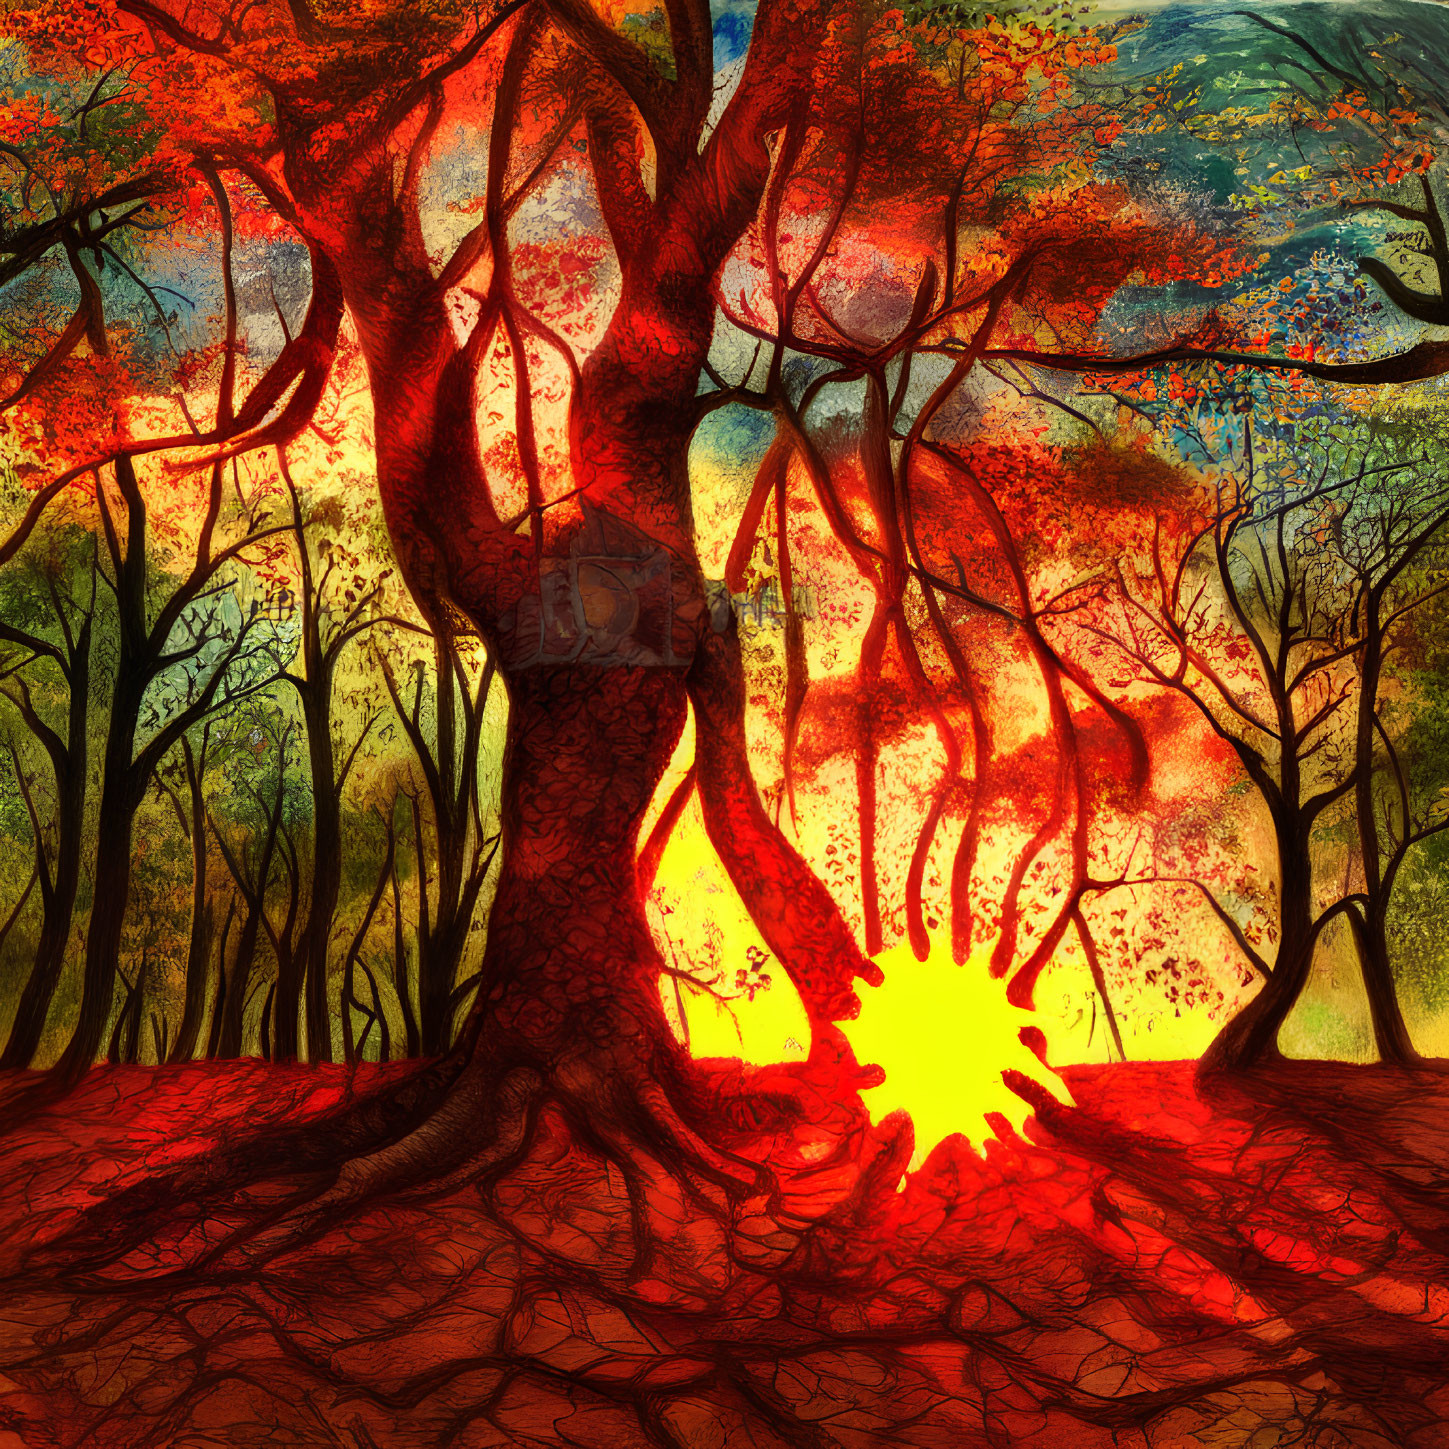 Colorful autumn forest painting with dominant red tree and warm sunlight.